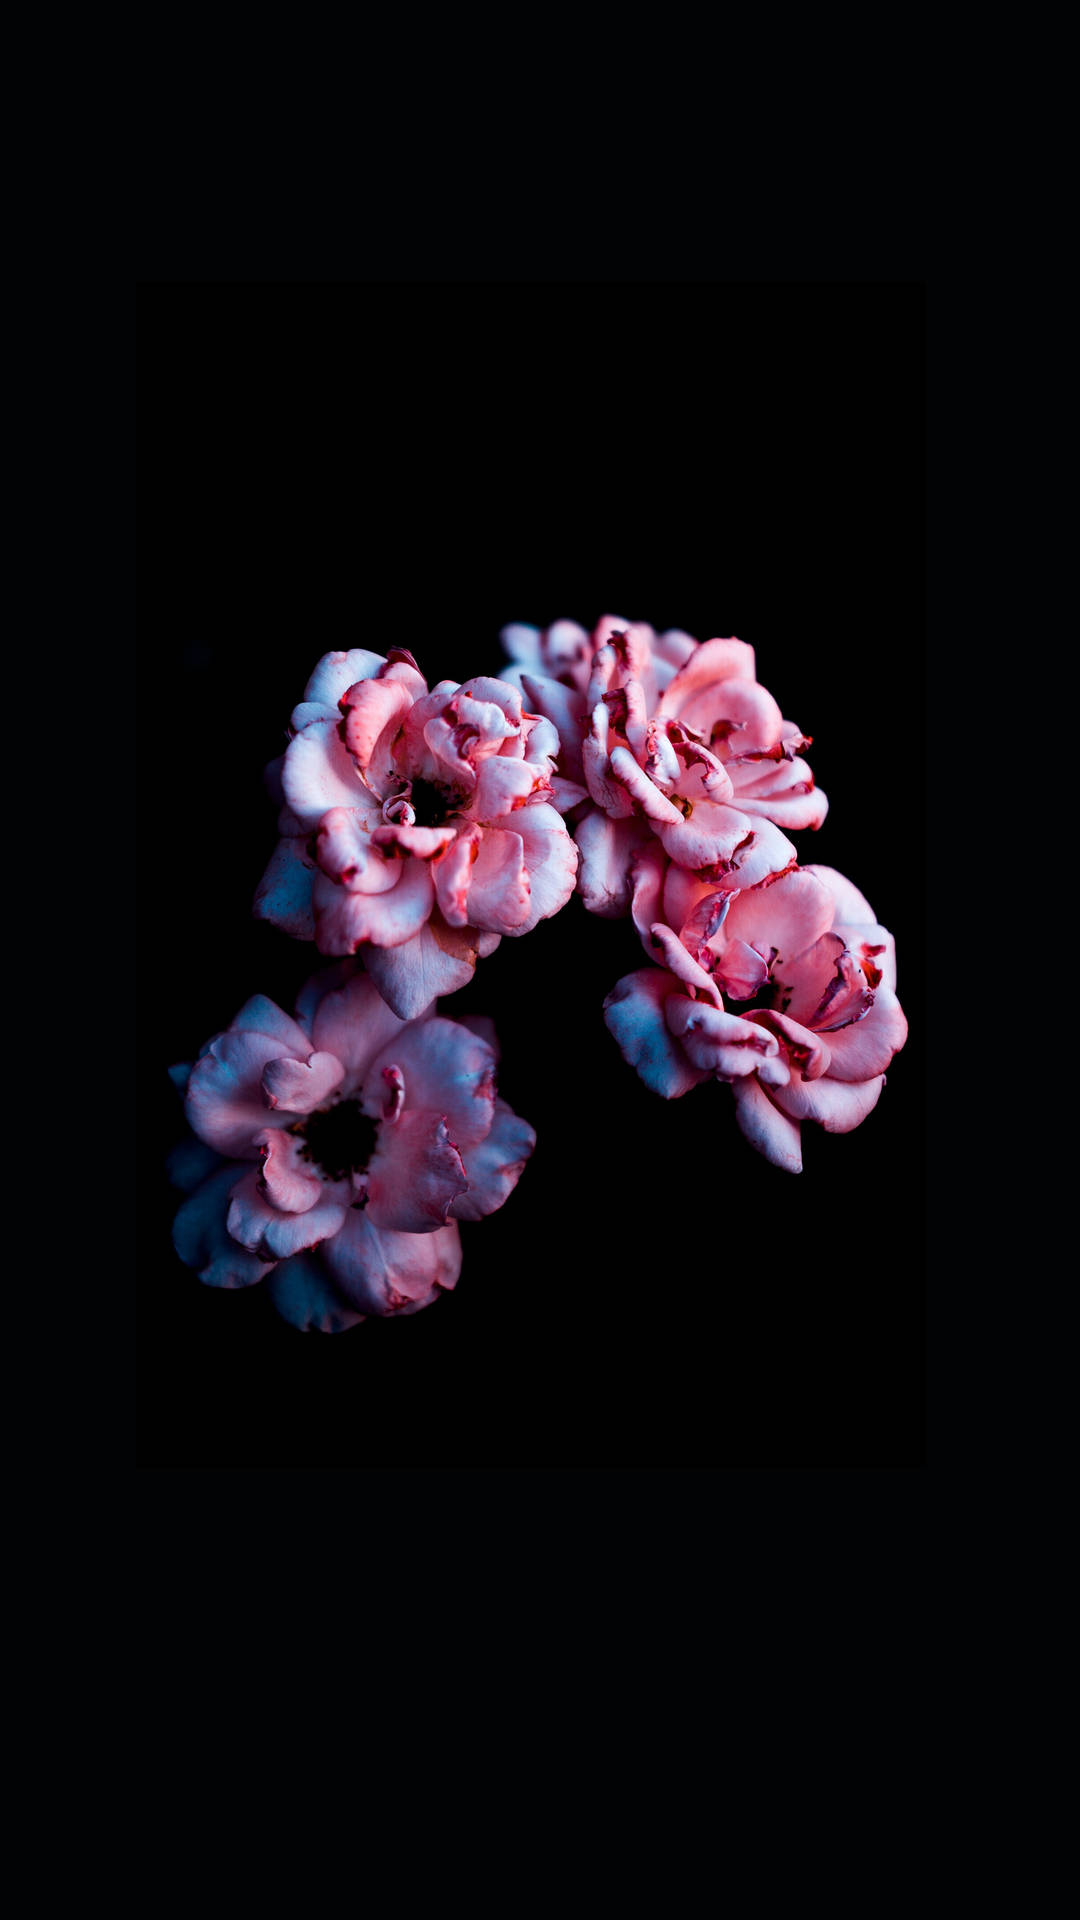 Iphone 11 Black Background With Pink Flowers